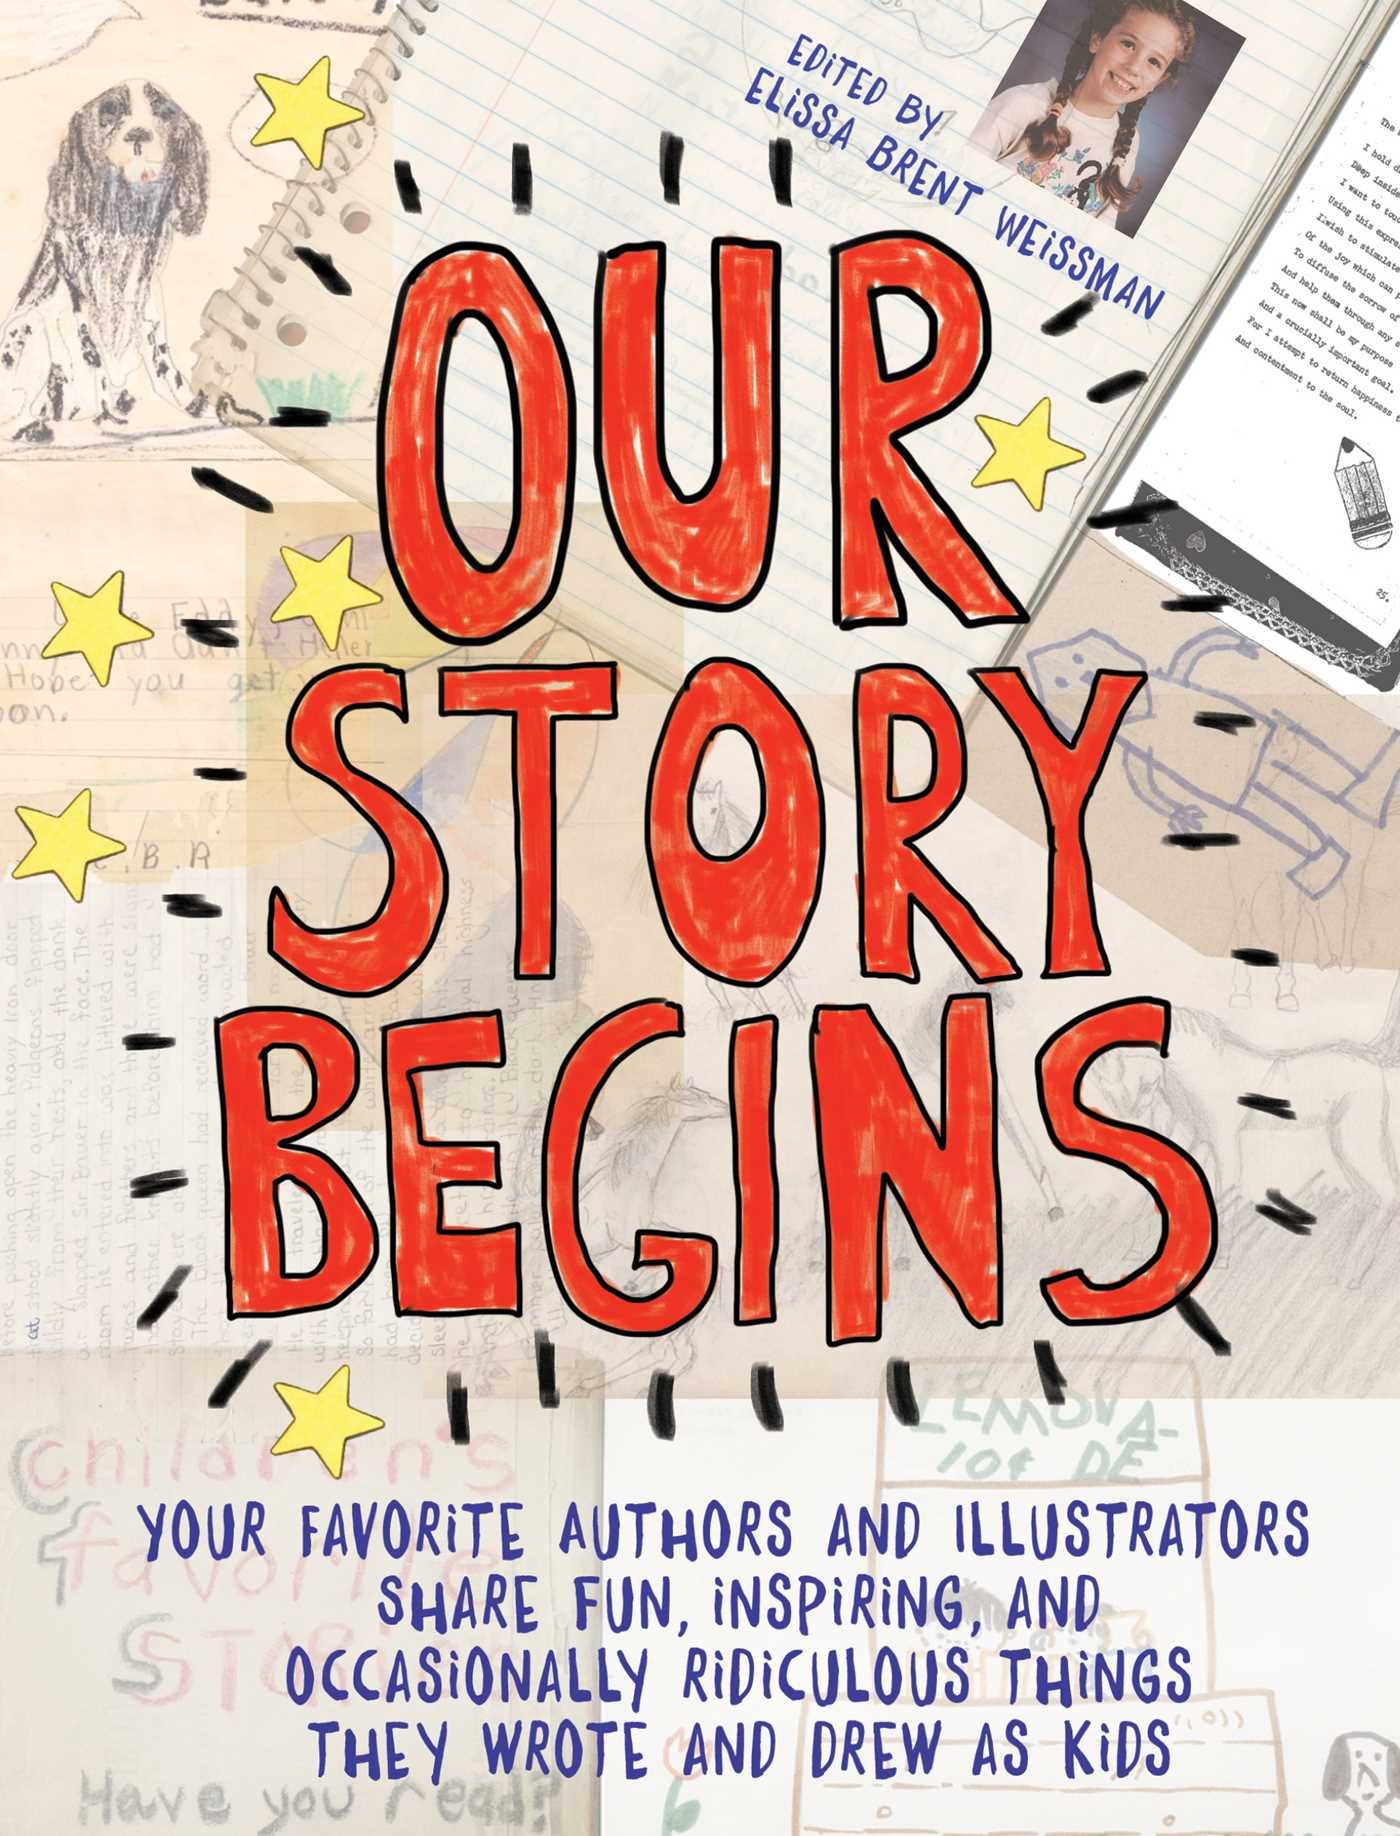 "Our Story Begins" edited by Elissa Brent Weissman